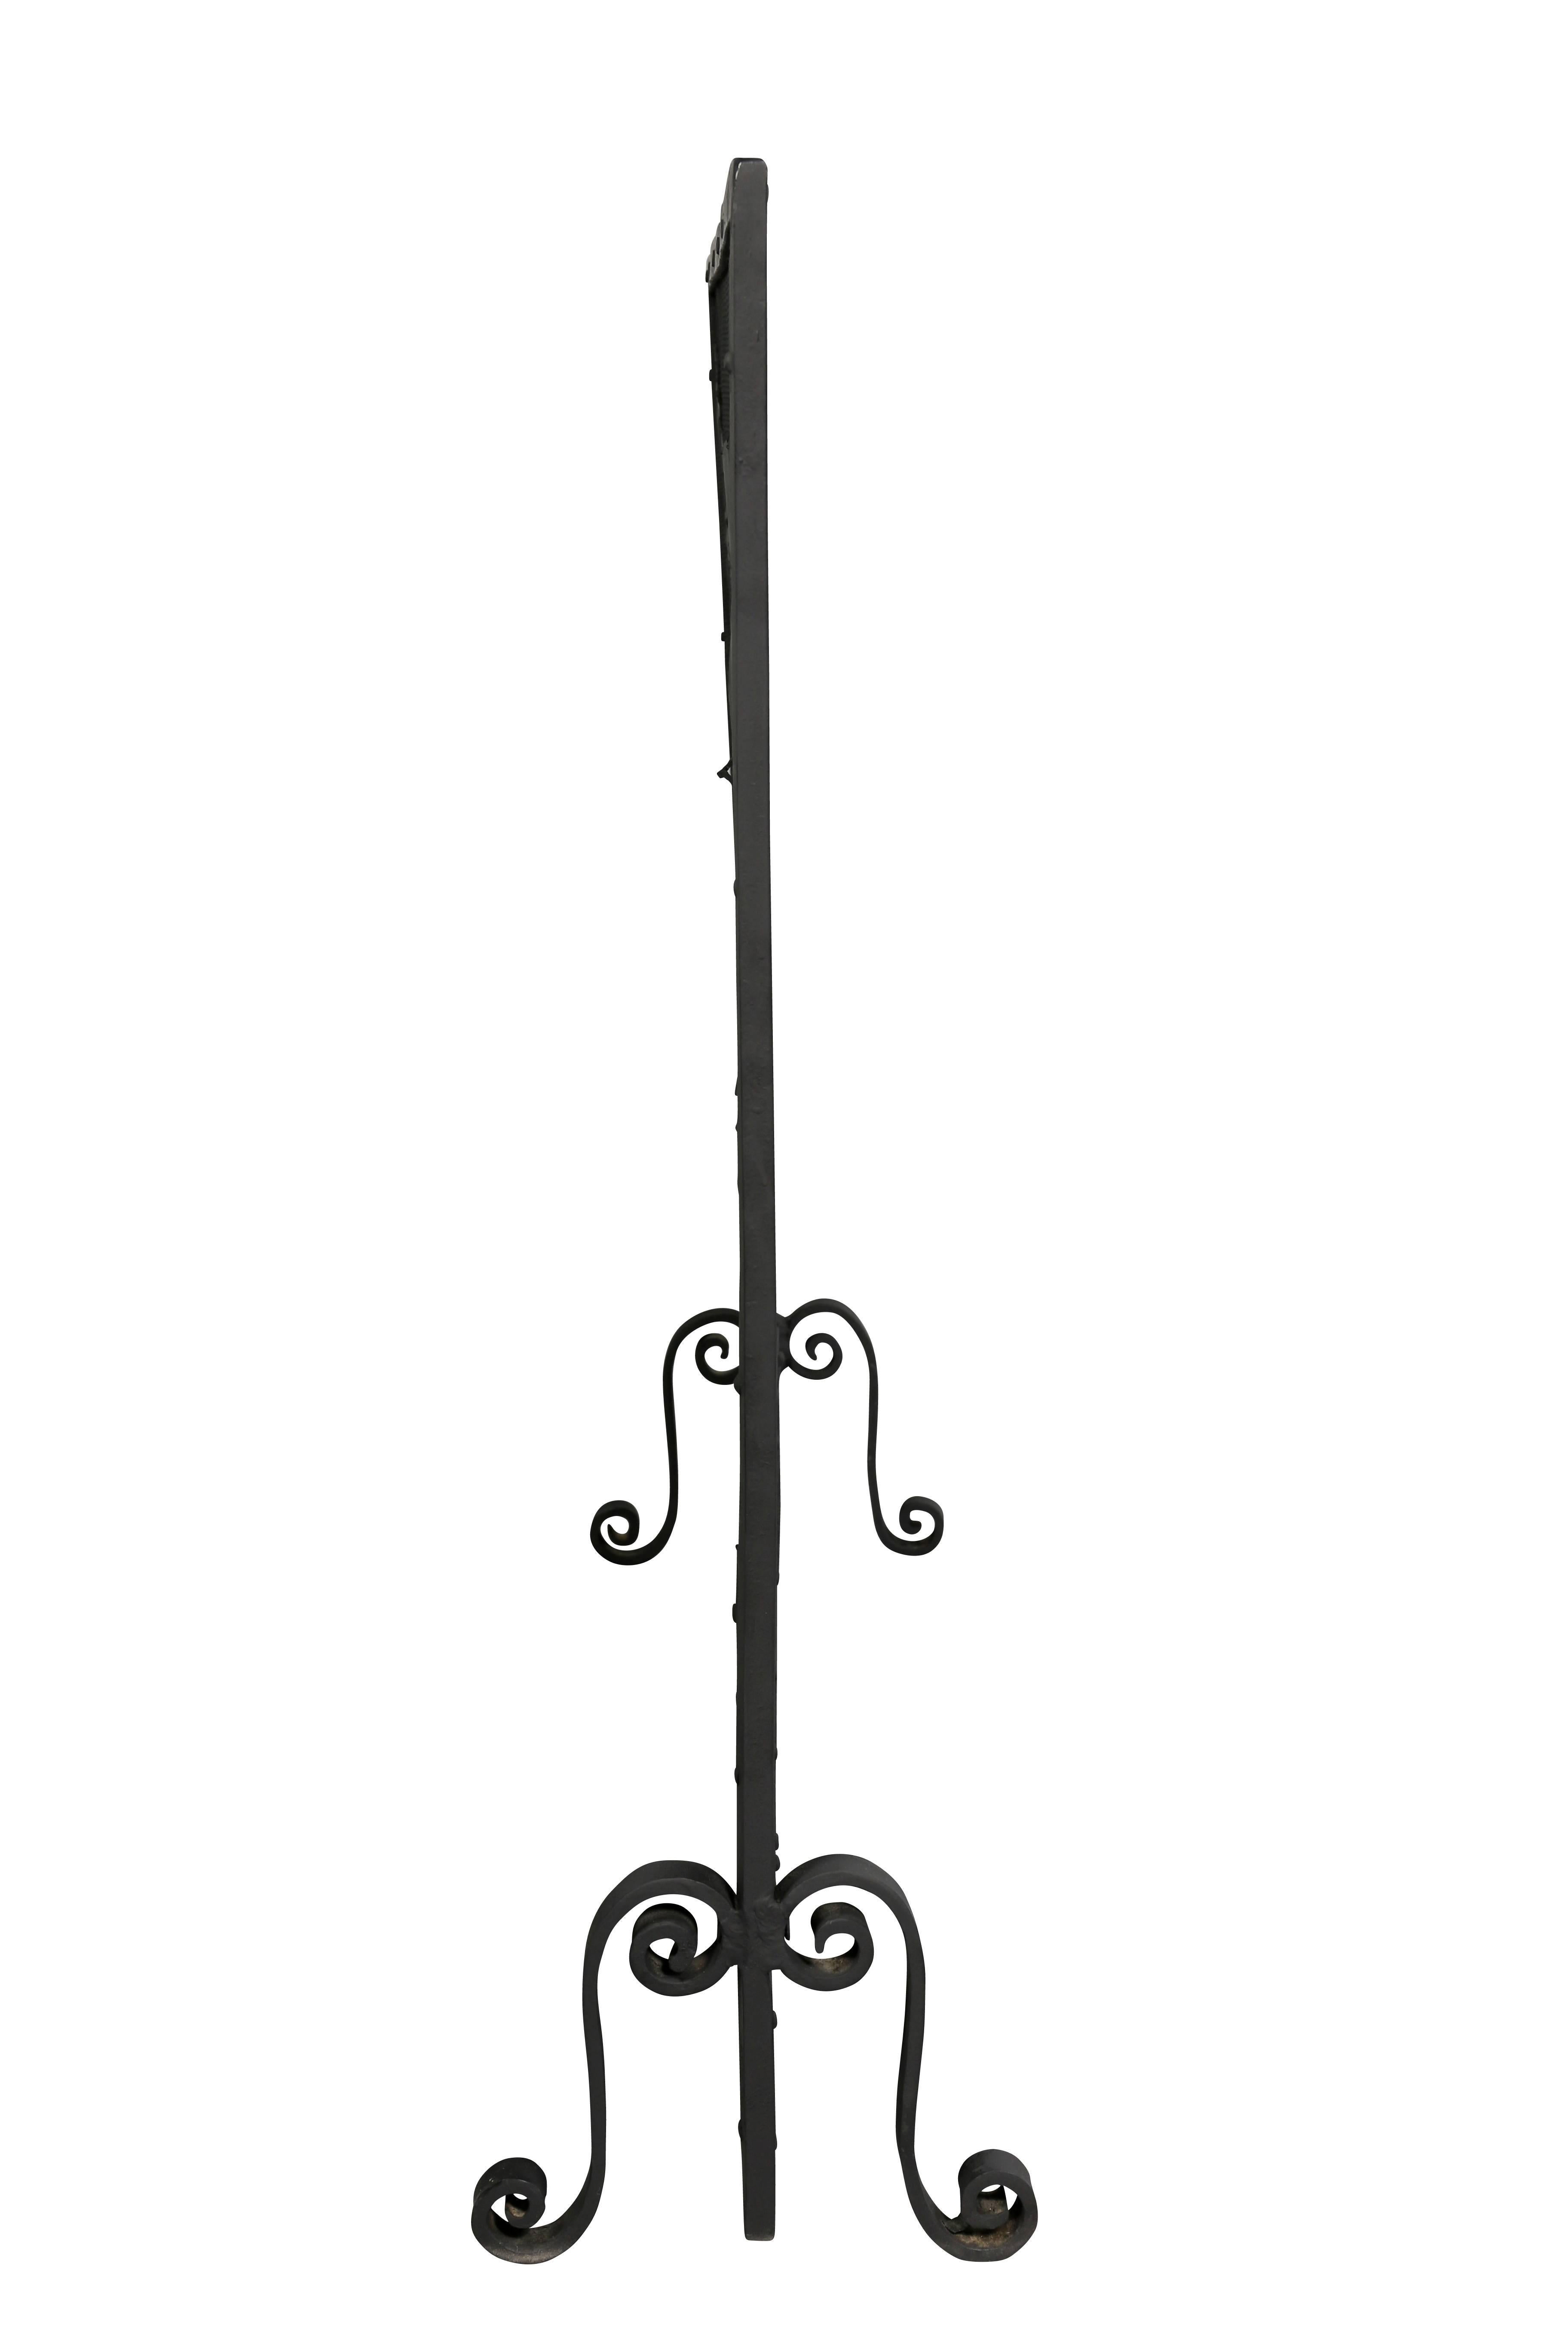 American Arts and Crafts Wrought Iron Fire Screen 1